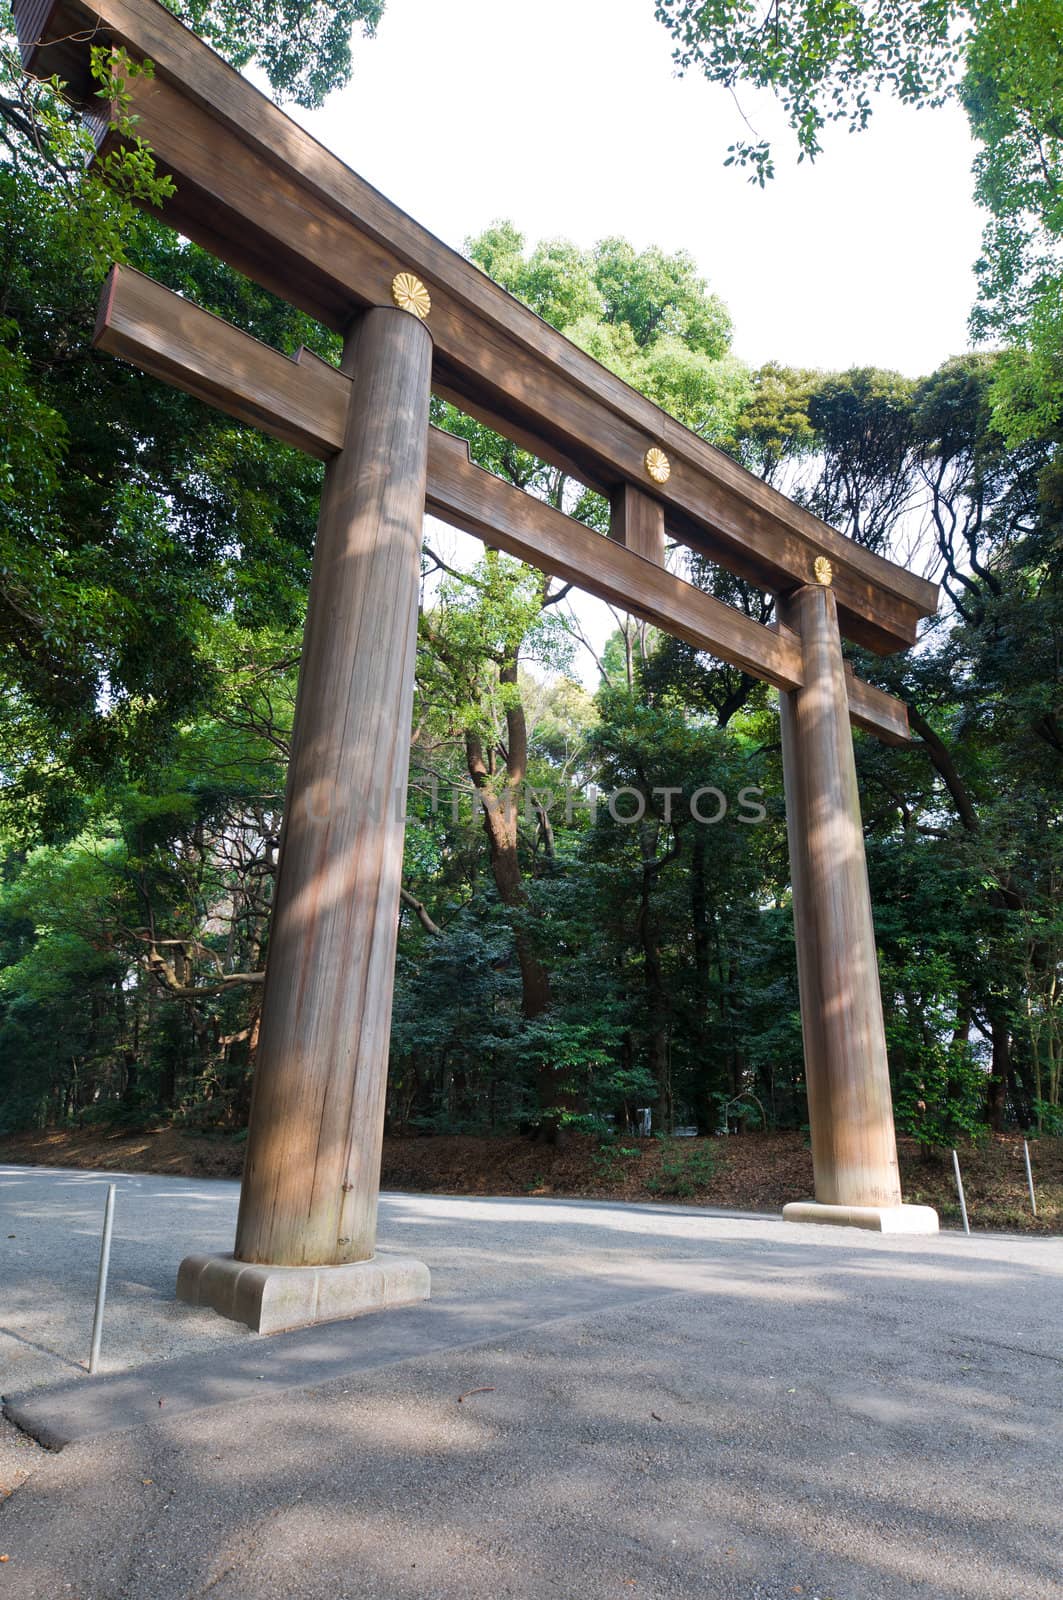 Japanese entrance gate on a sunny day with blue sky